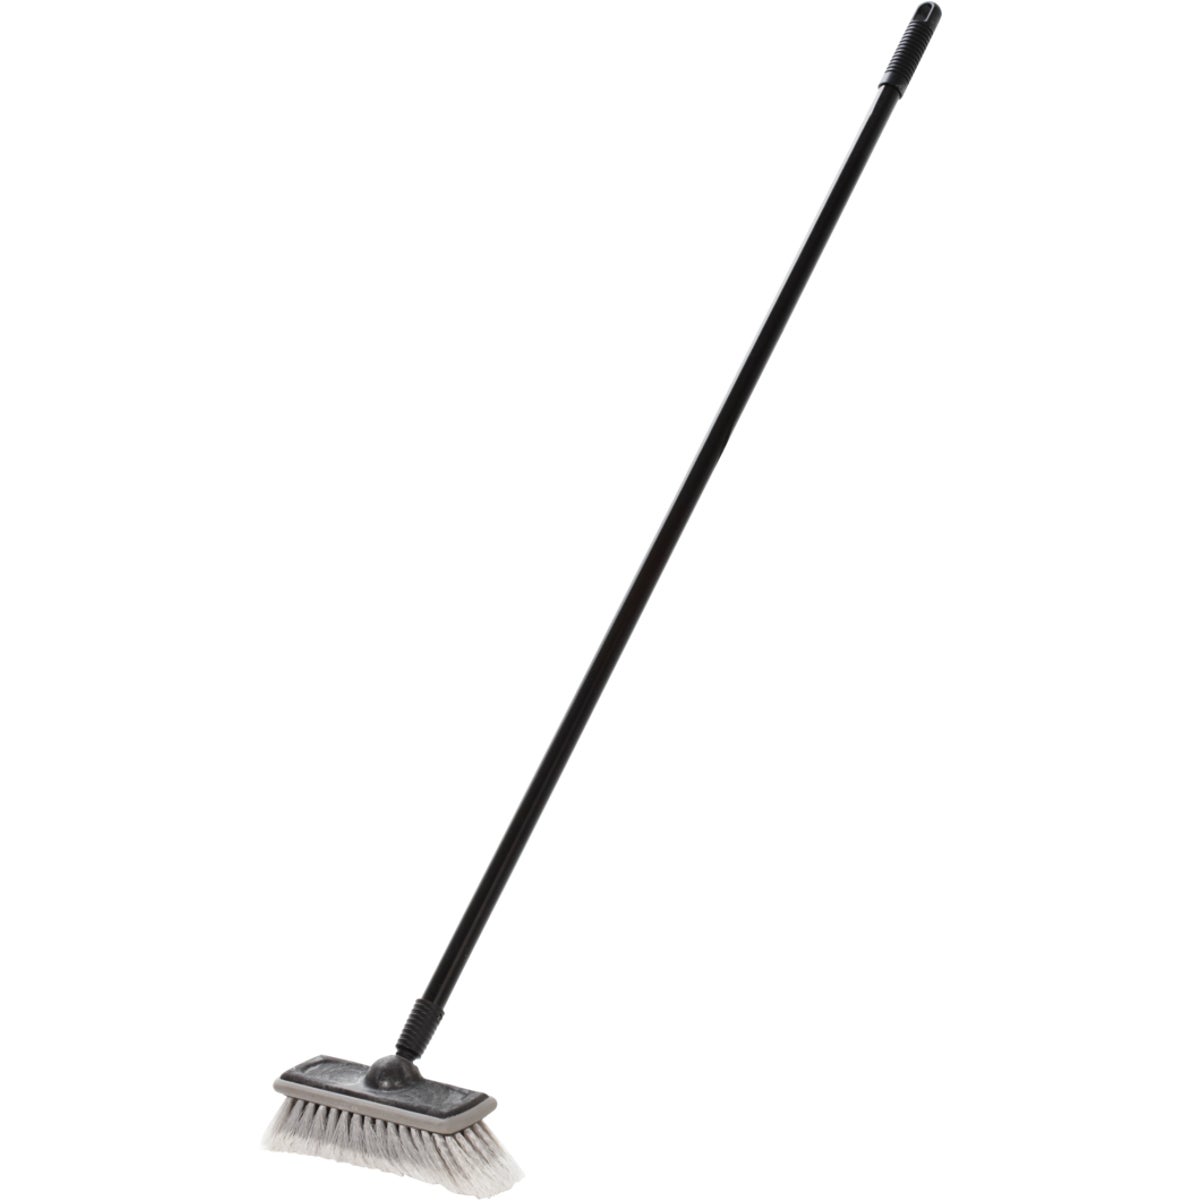 Item 572209, Twist-on 8" wash brush features super soft bristles and protective rubber 